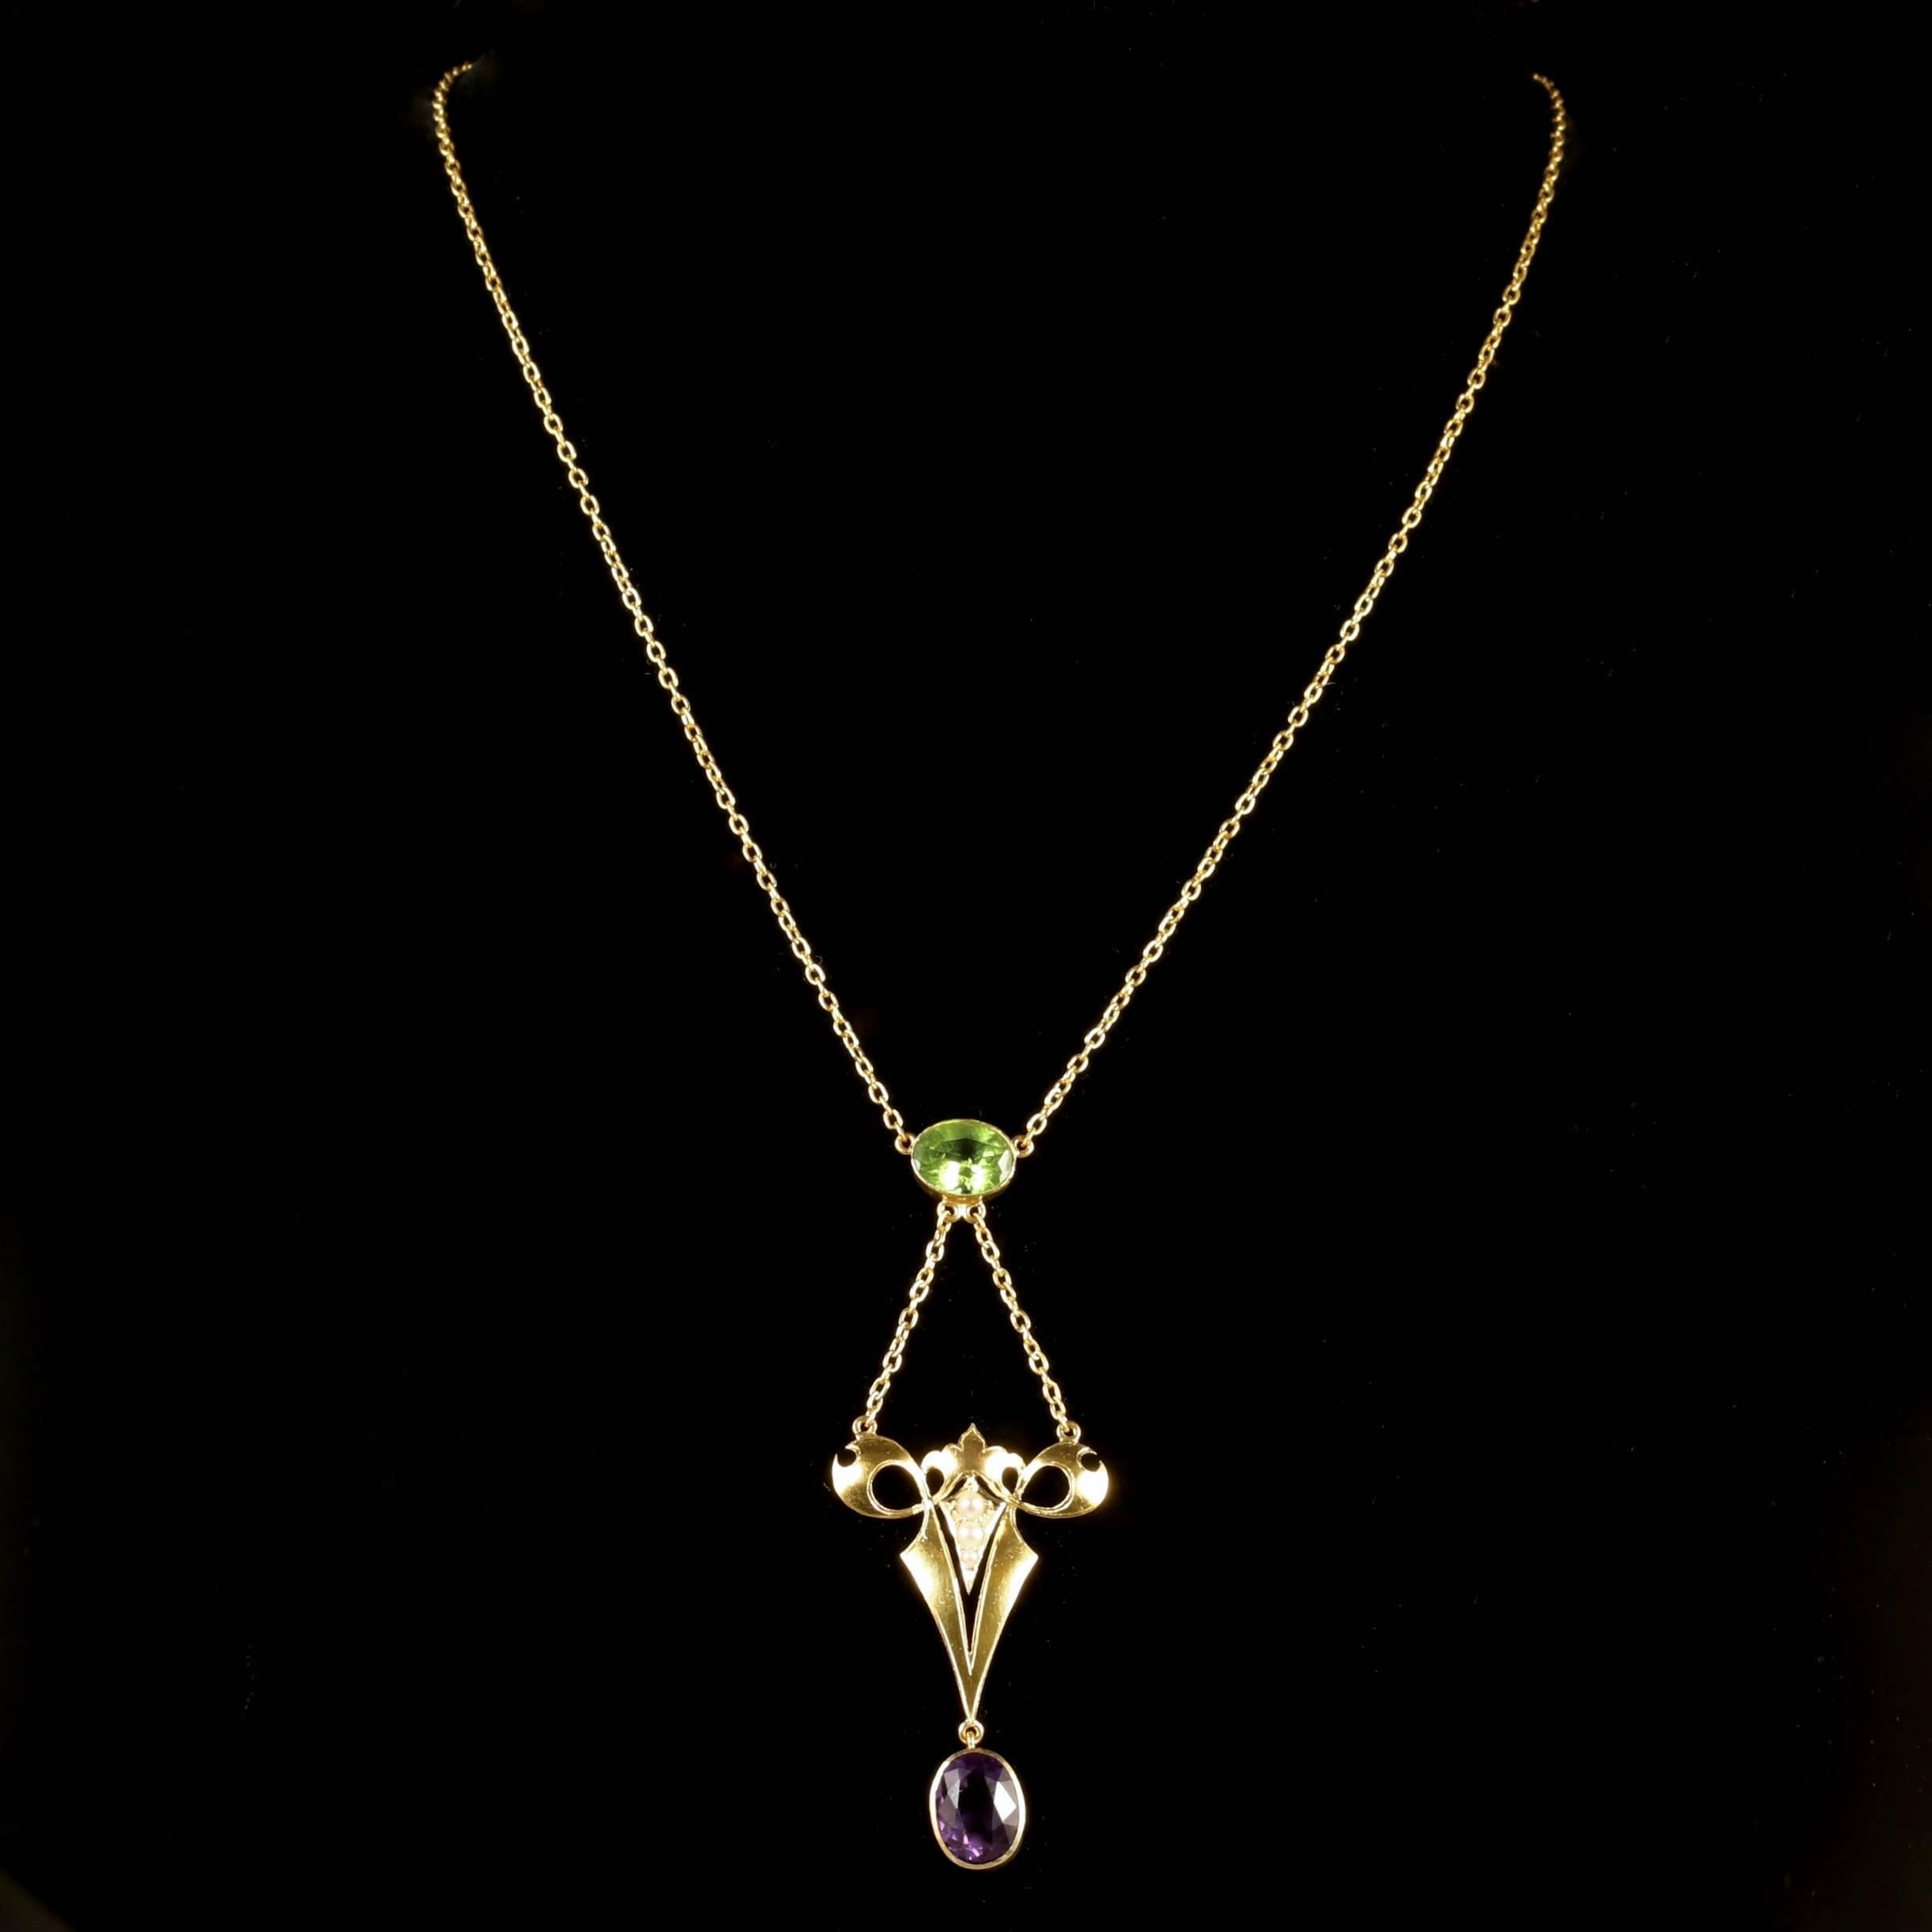 This fabulous 15ct Yellow Gold Victorian Suffragette necklace is Circa 1900.

The beautifully designed necklace is adorned with a Peridot, leading down to 3 Pearls in a Gold gallery, and a Amethyst dropper. This combination of gemstones represent